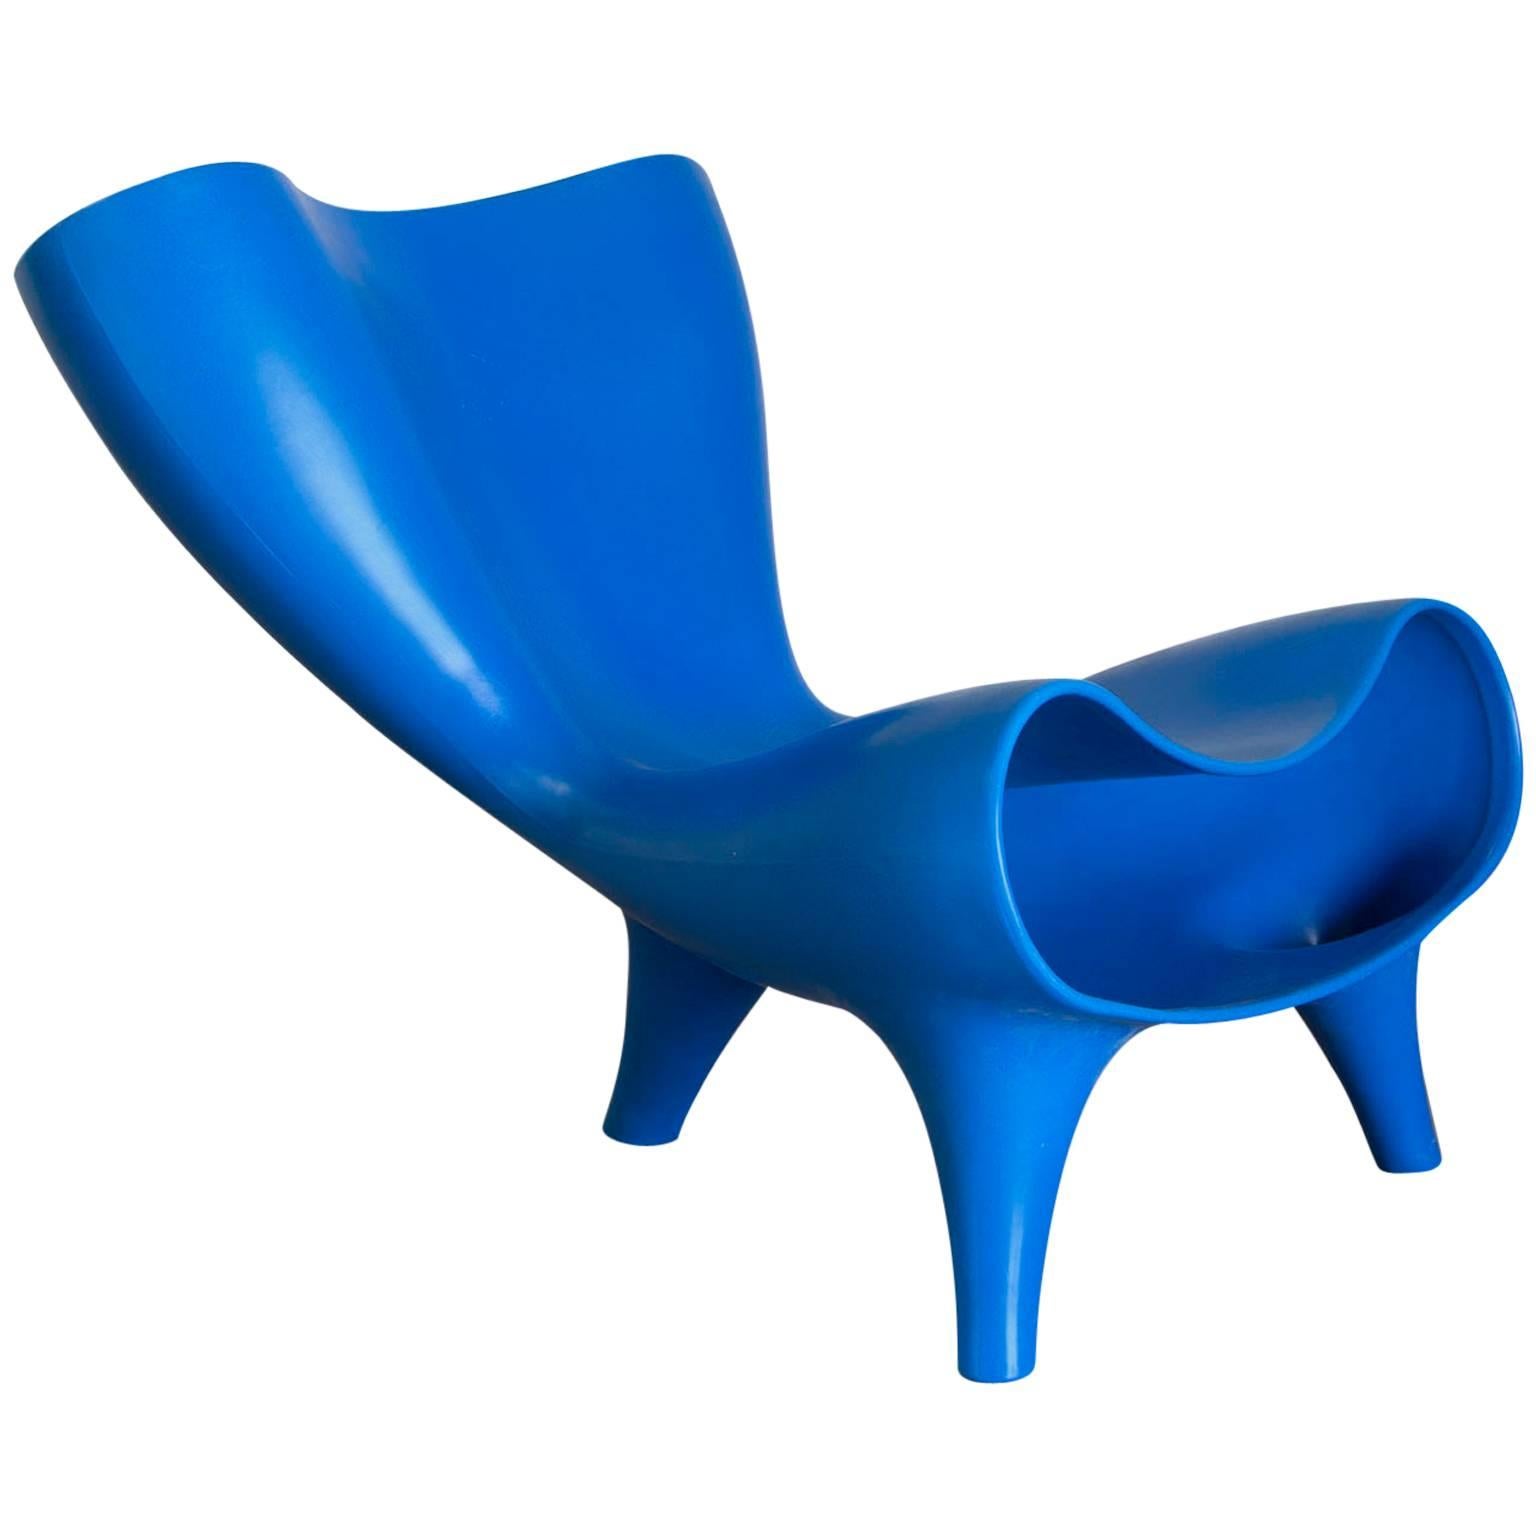 1983, Marc Newson, Nowadays Rare Electric Blue Orgone Chair